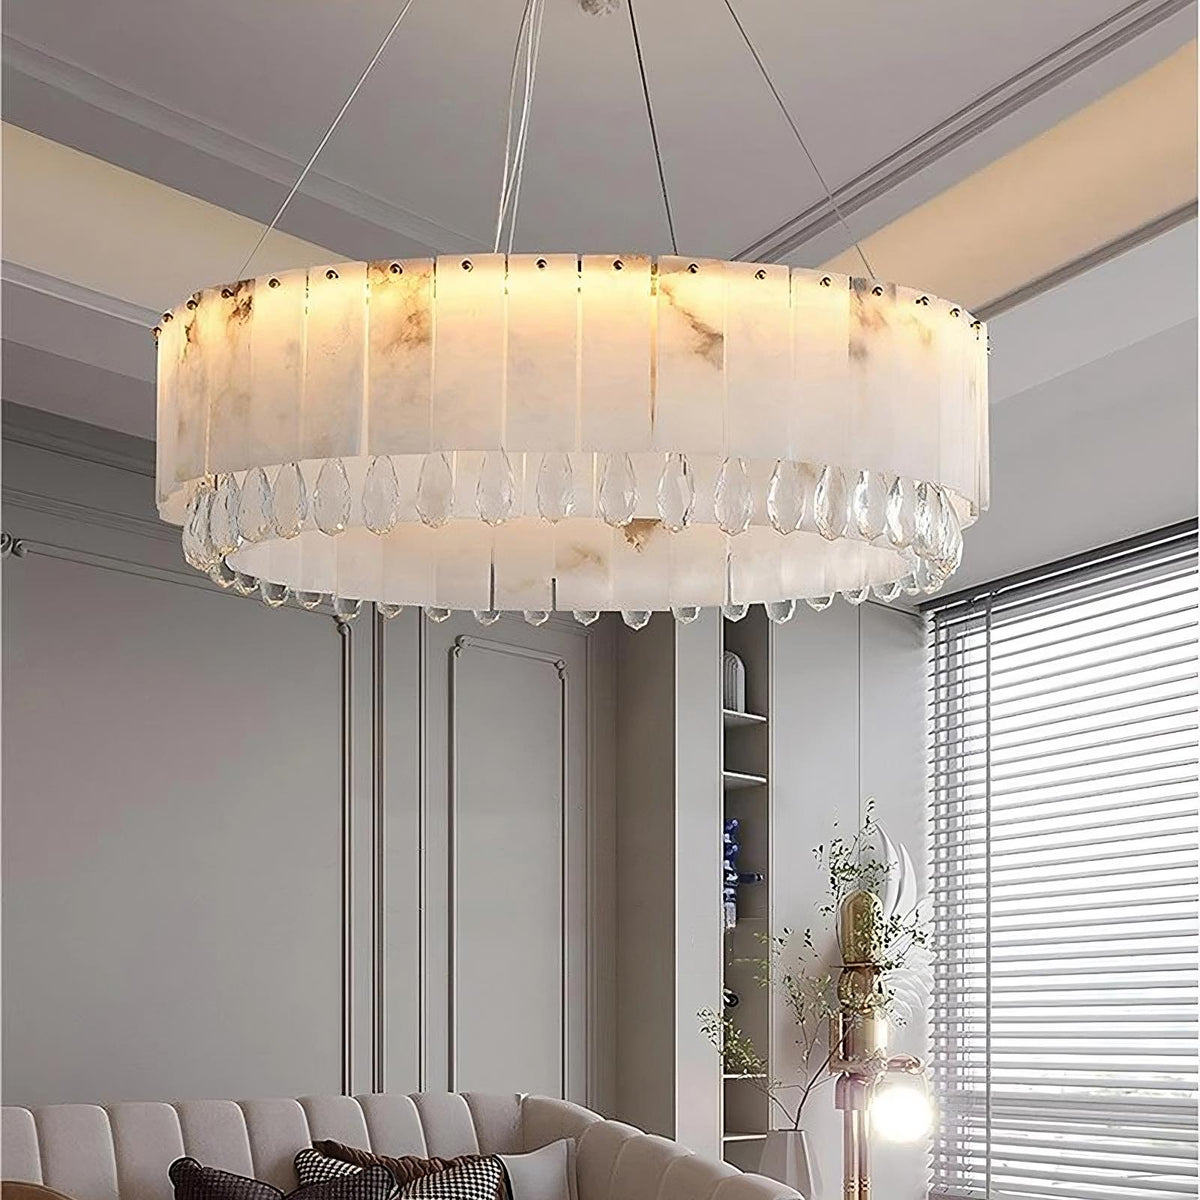 A modern living room features an elegant, large Modern Crystal and Spanish Marble Chandelier by Morsale.com with a circular design hanging from the ceiling. Below the chandelier is a taupe sofa adorned with pillows. Natural light filters in through a window with horizontal blinds. A decorative plant is visible.